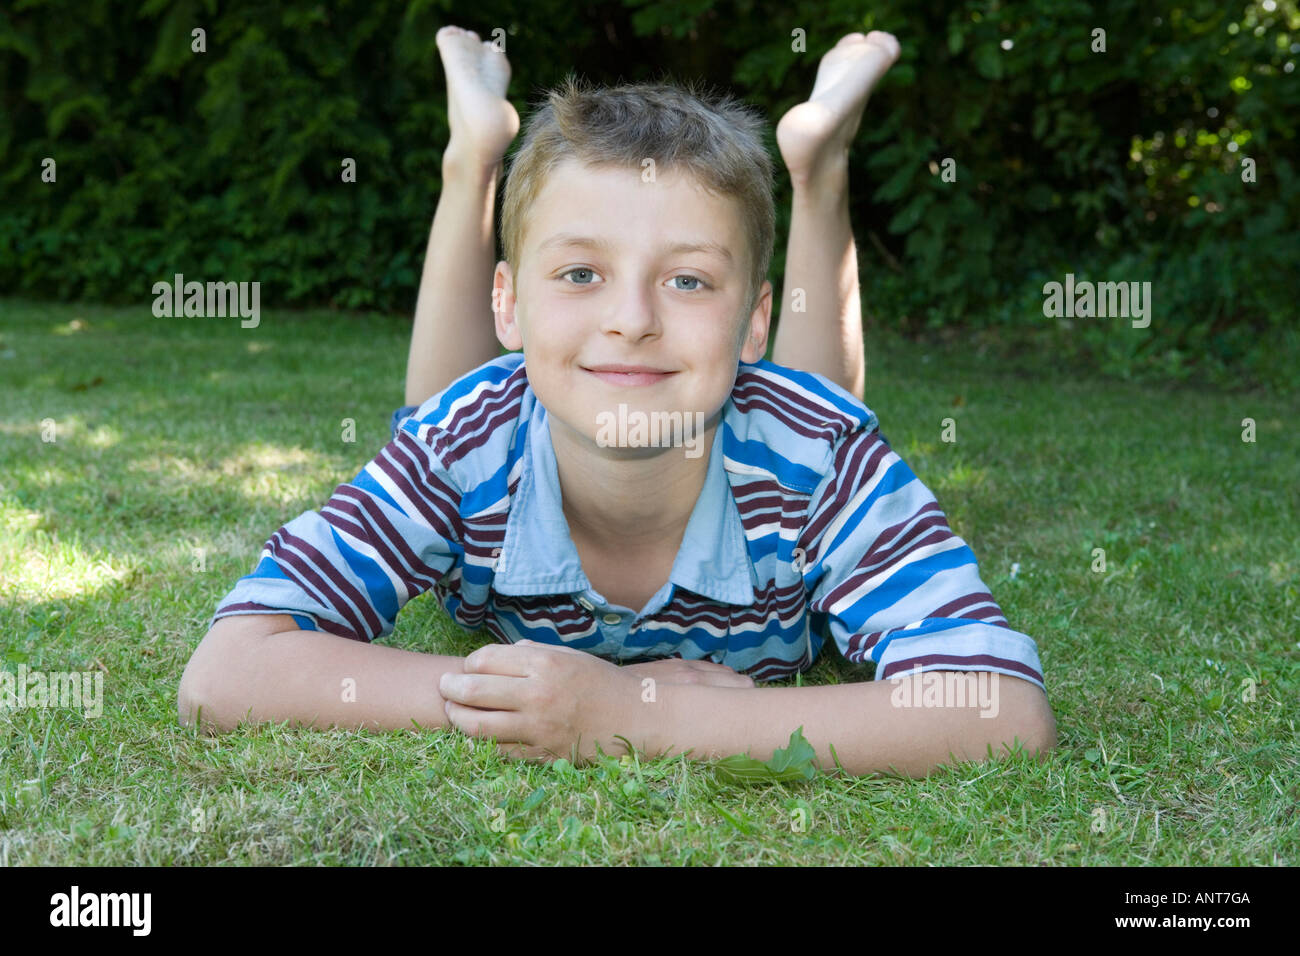 Portrait of boy lying on grass with legs raised Stock Photo